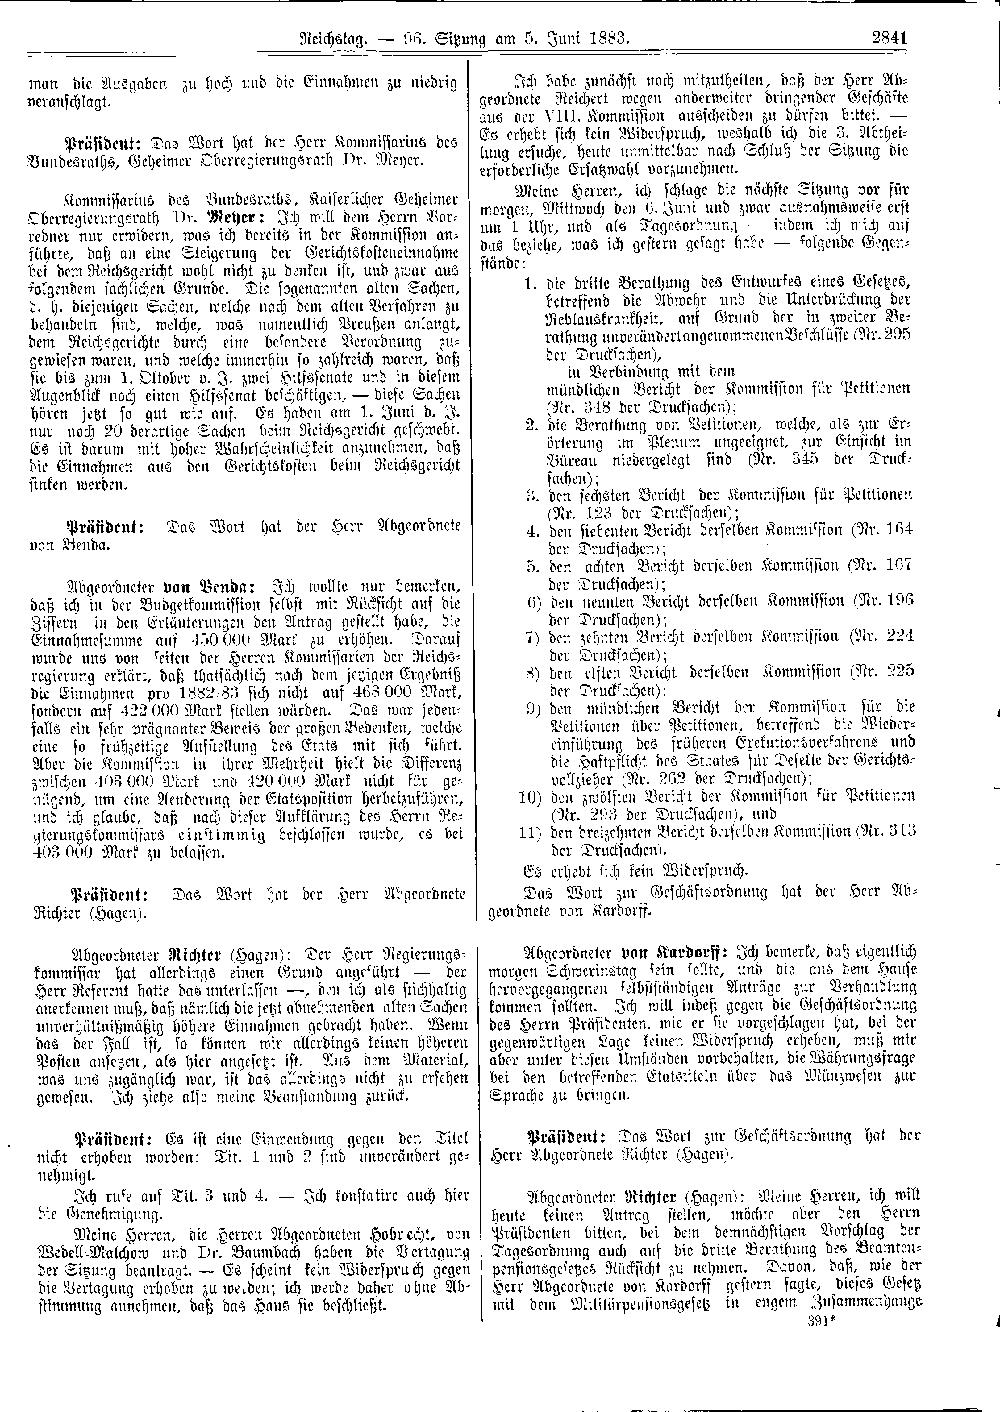 Scan of page 2841